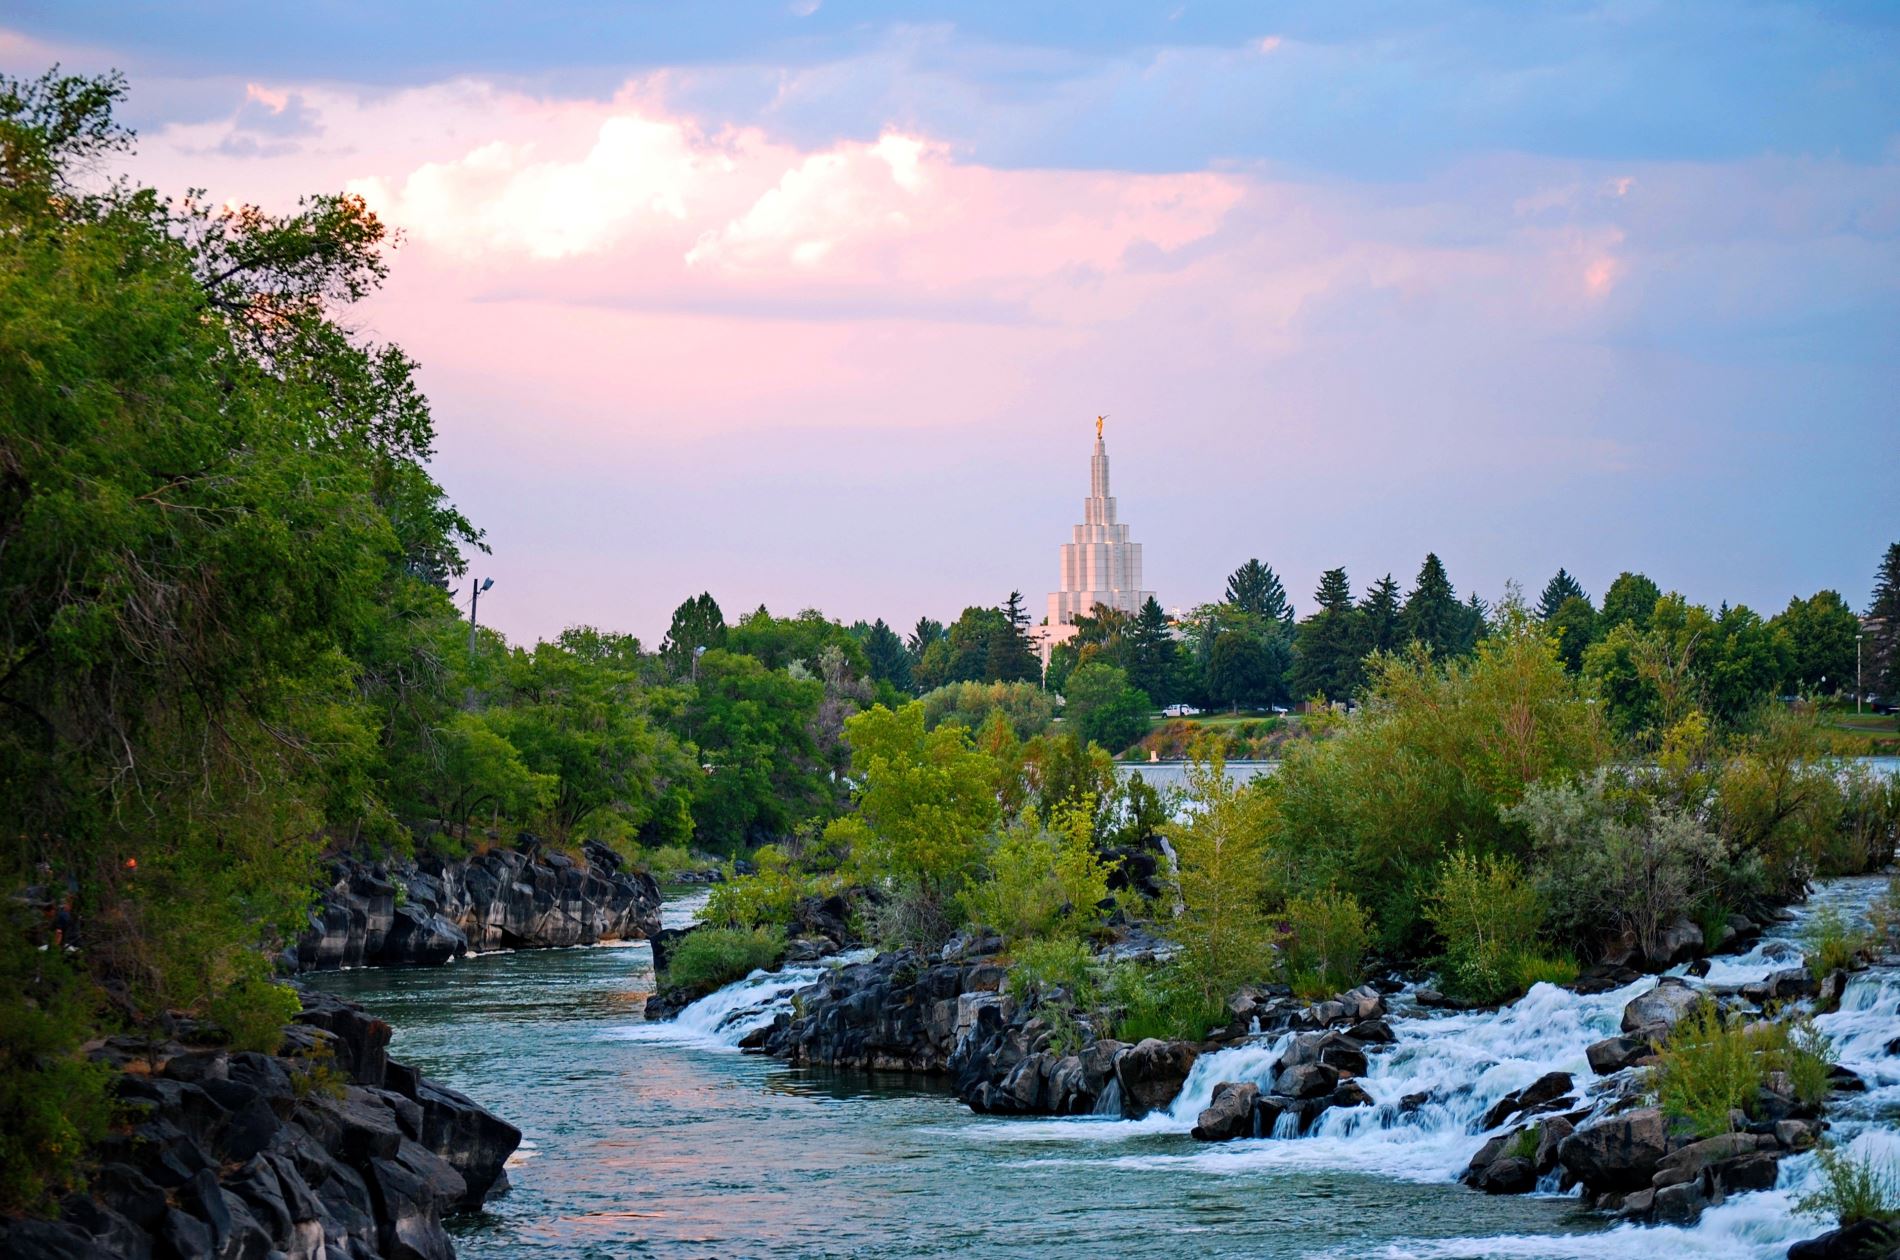 Idaho Falls Named Best Performing Small City in America by Milken